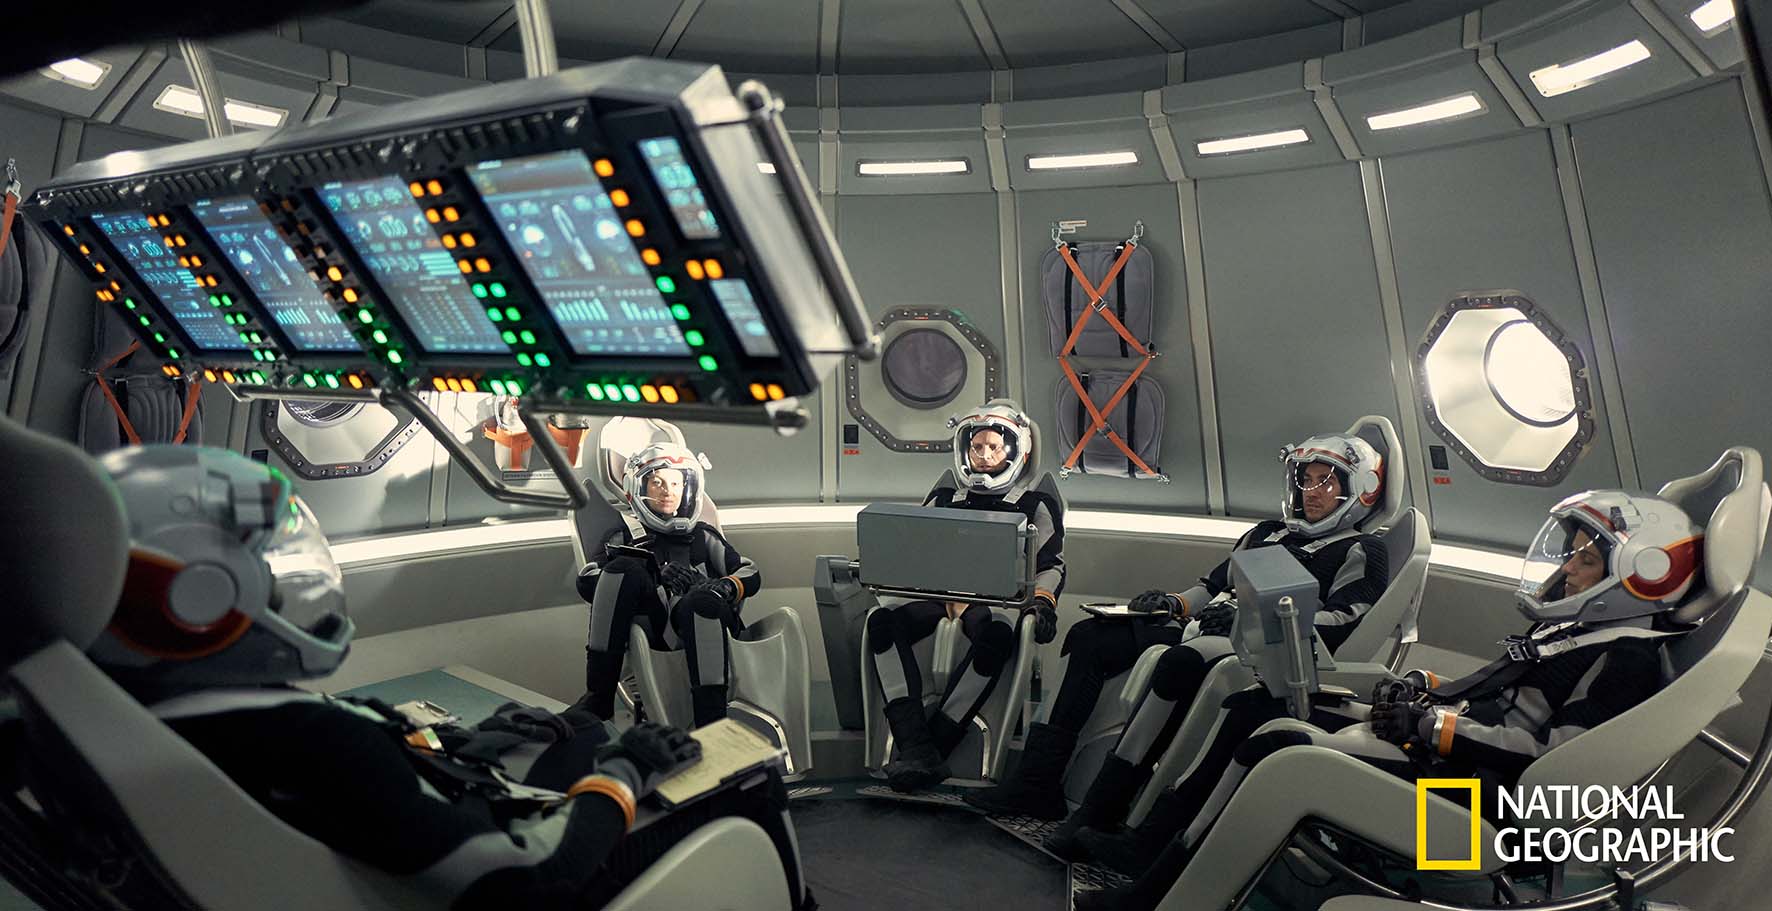 The six-person crew on the Daedalus.    The global event series MARS premieres on the National Geographic Channel in November 2016.  (photo credit: National Geographic Channels/Robert Viglasky)